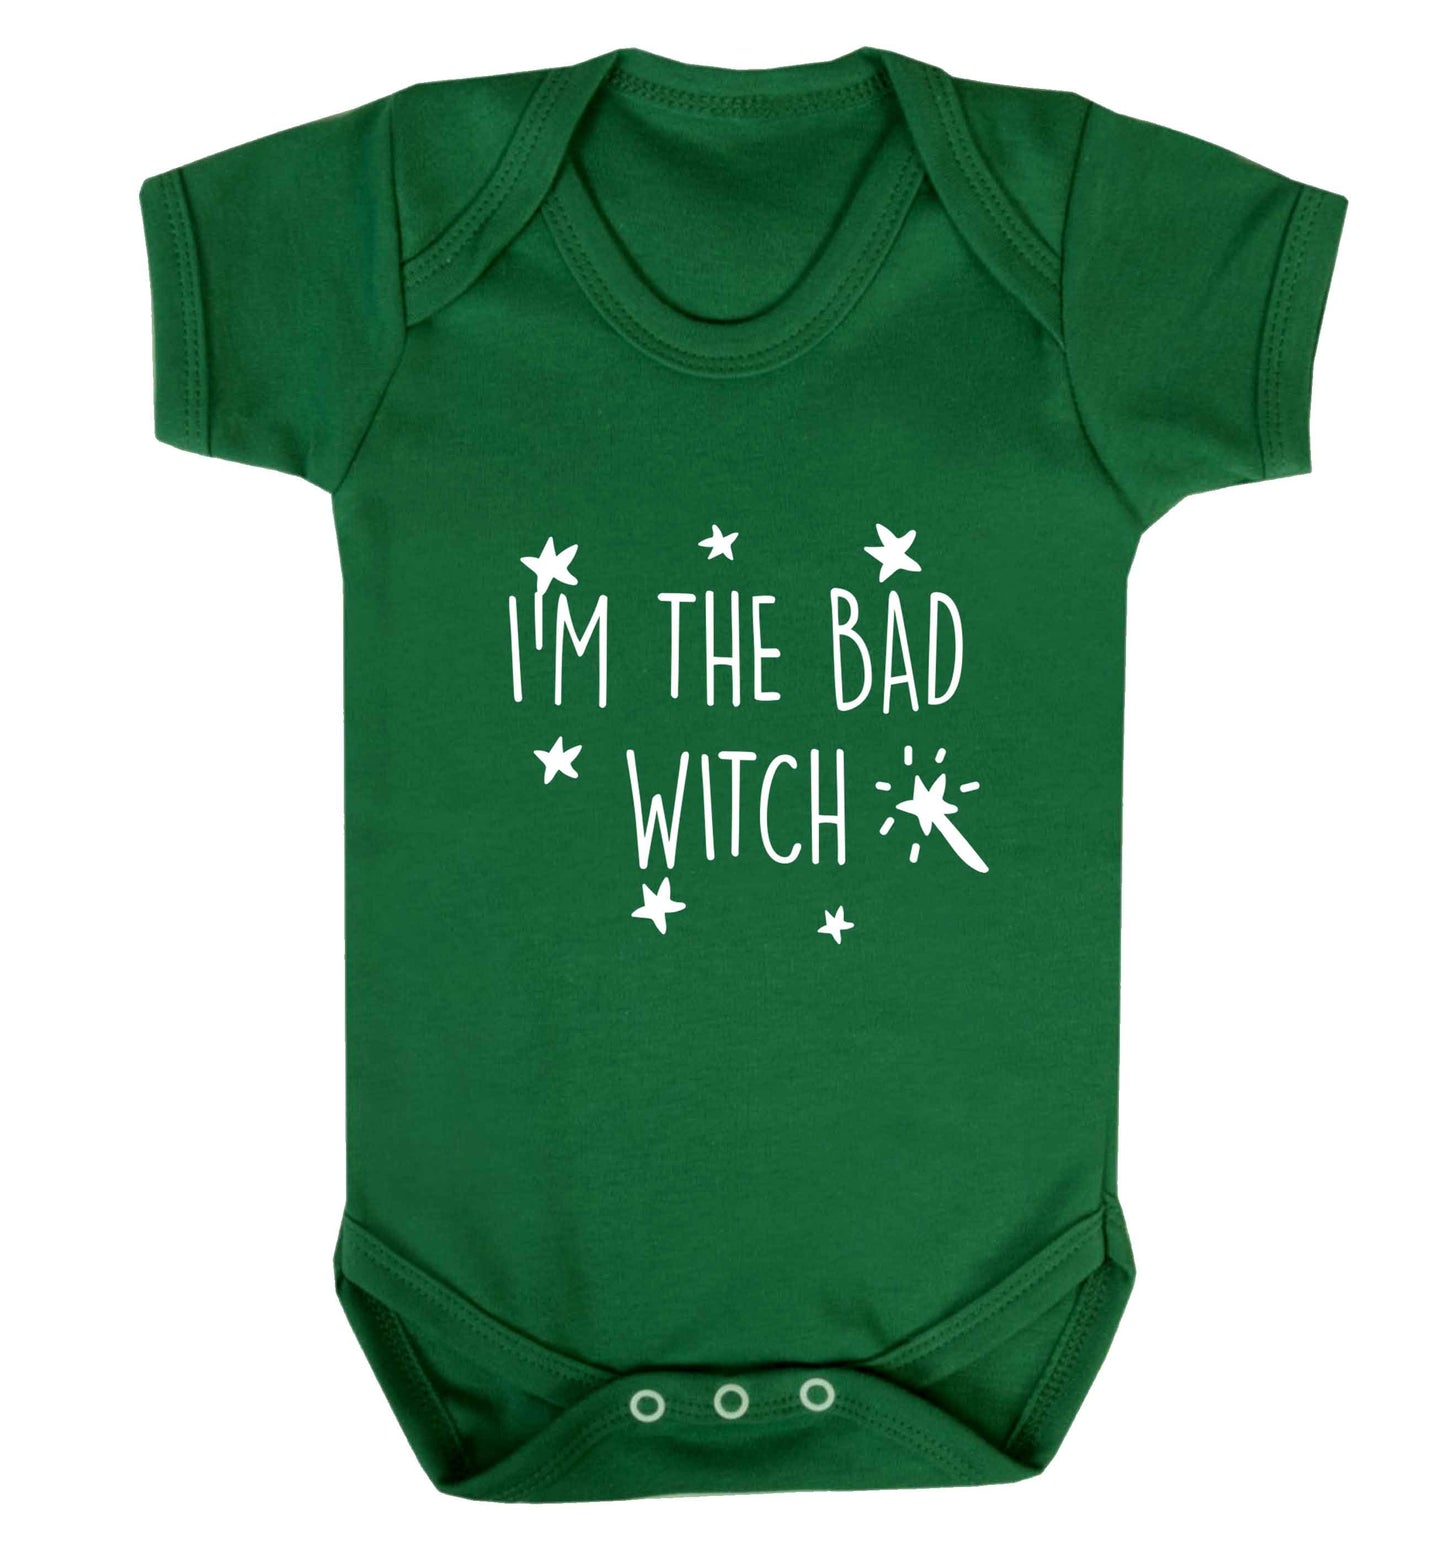 Bad witch baby vest green 18-24 months